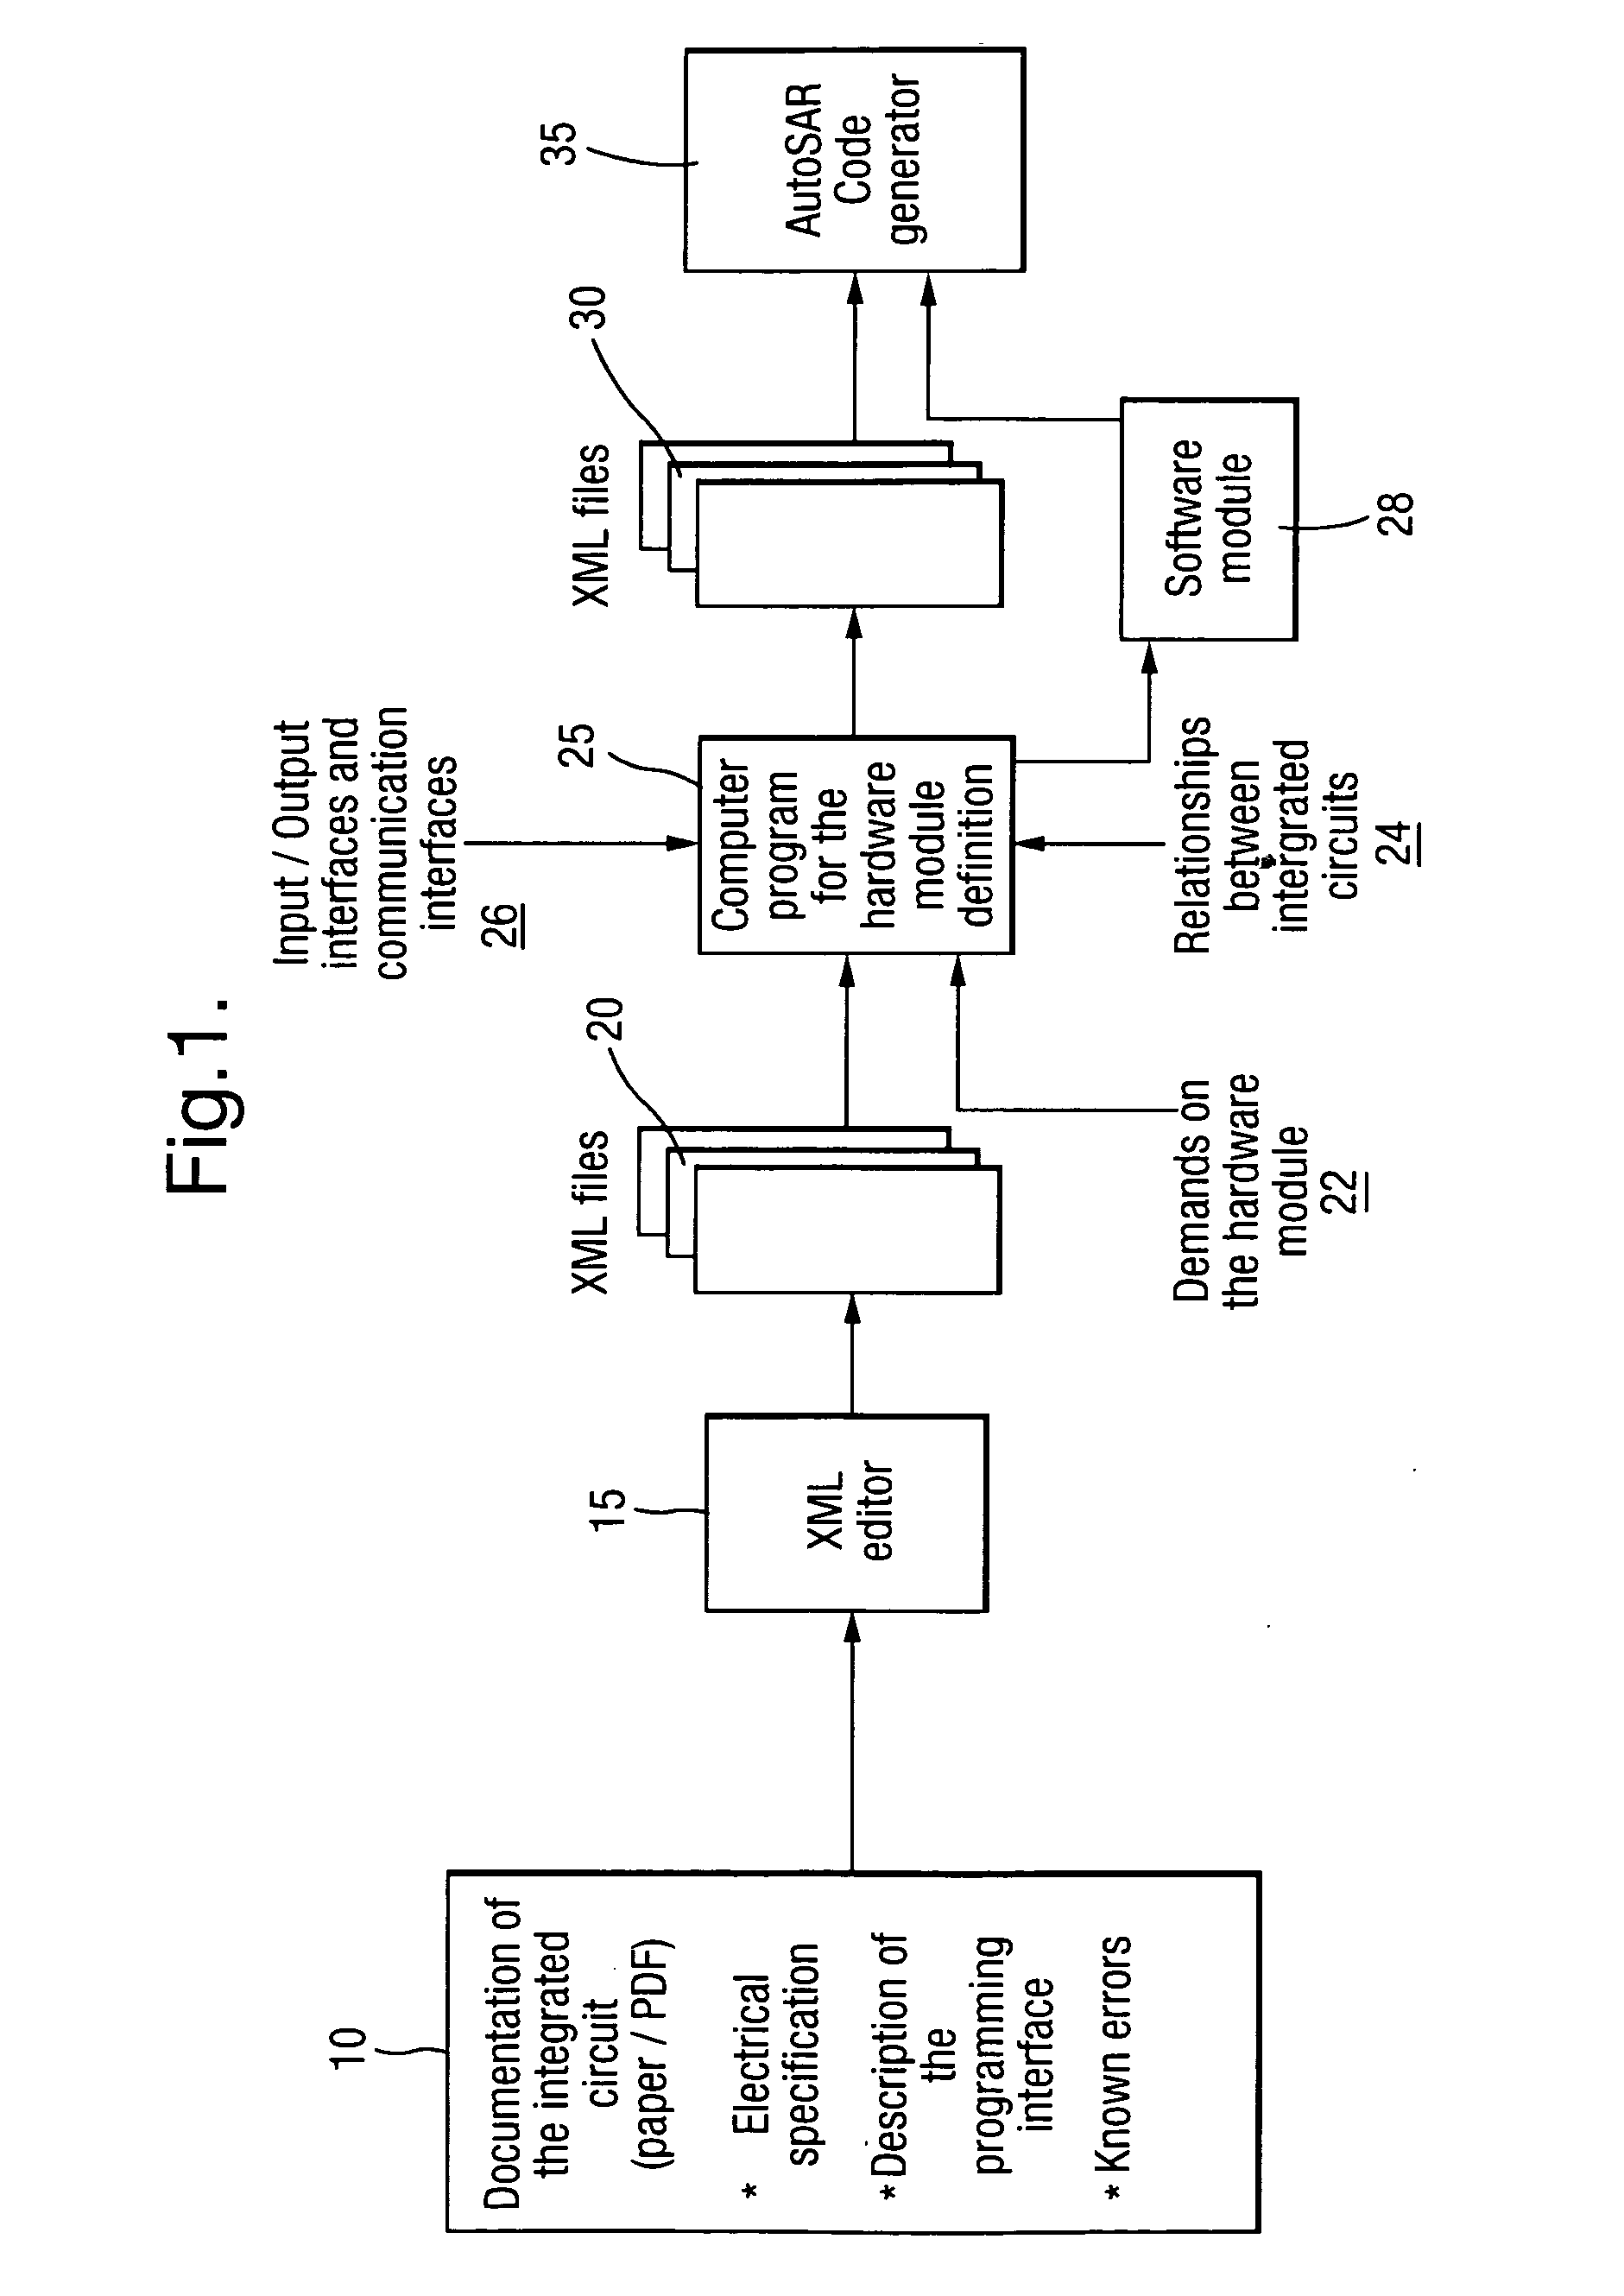 Method for the integration of an integrated circuit into a standardized software architecture for embedded systems